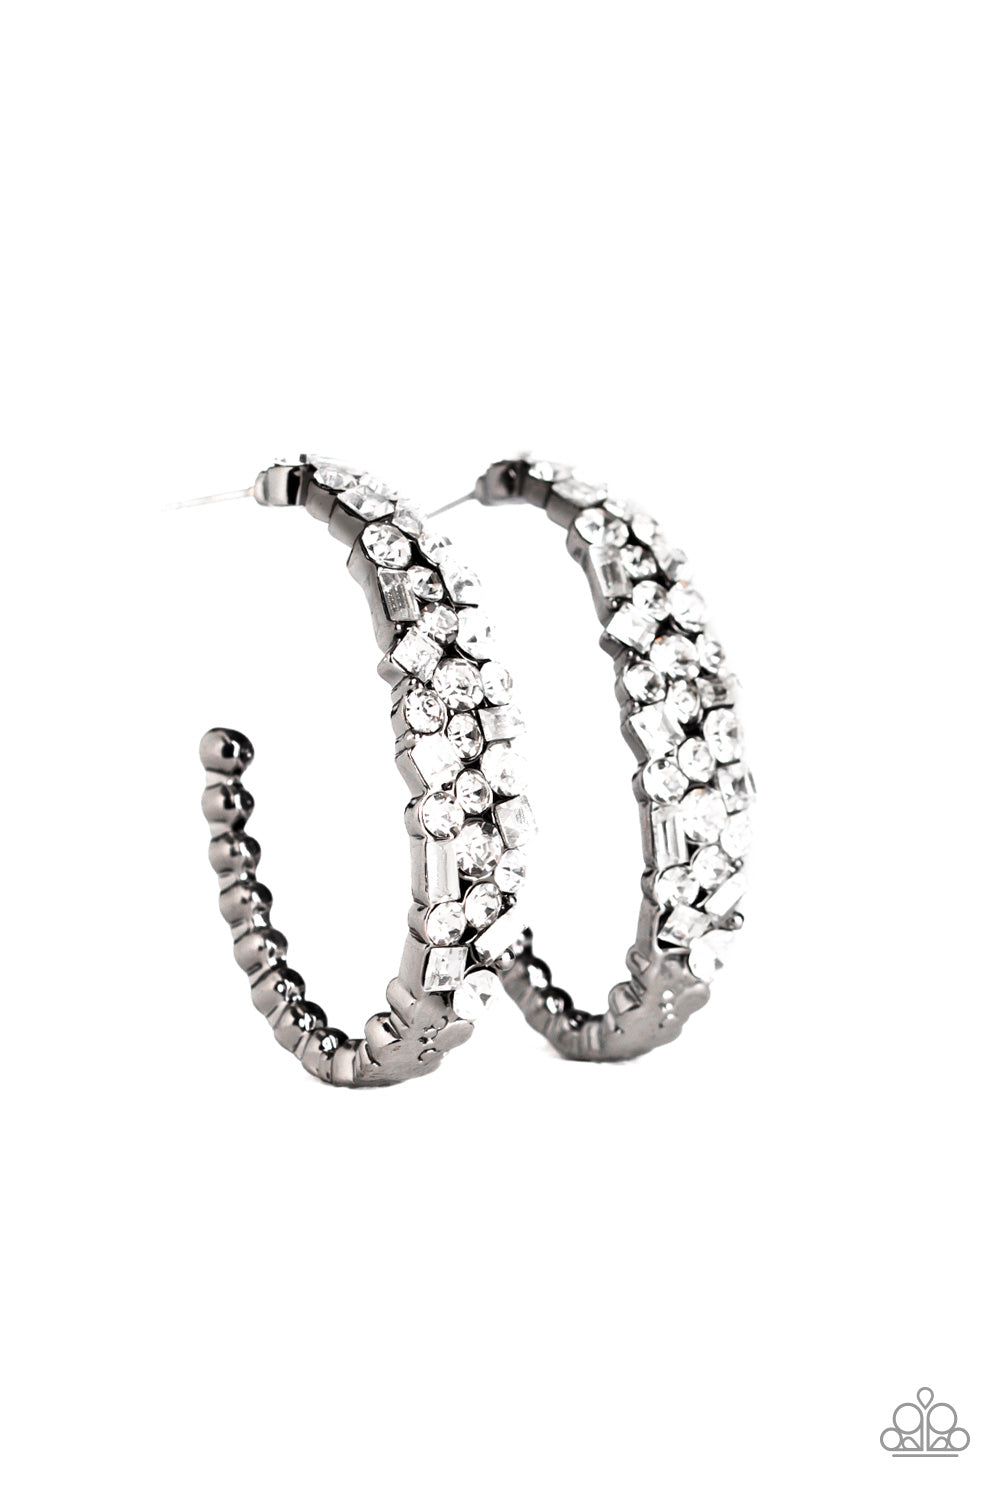 The front of a hook-shaped gunmetal hoop is encrusted in a collision of glassy white rhinestones for a blinding look. Earring attaches to a standard post fitting. Hoop measures approximately 1" in diameter.